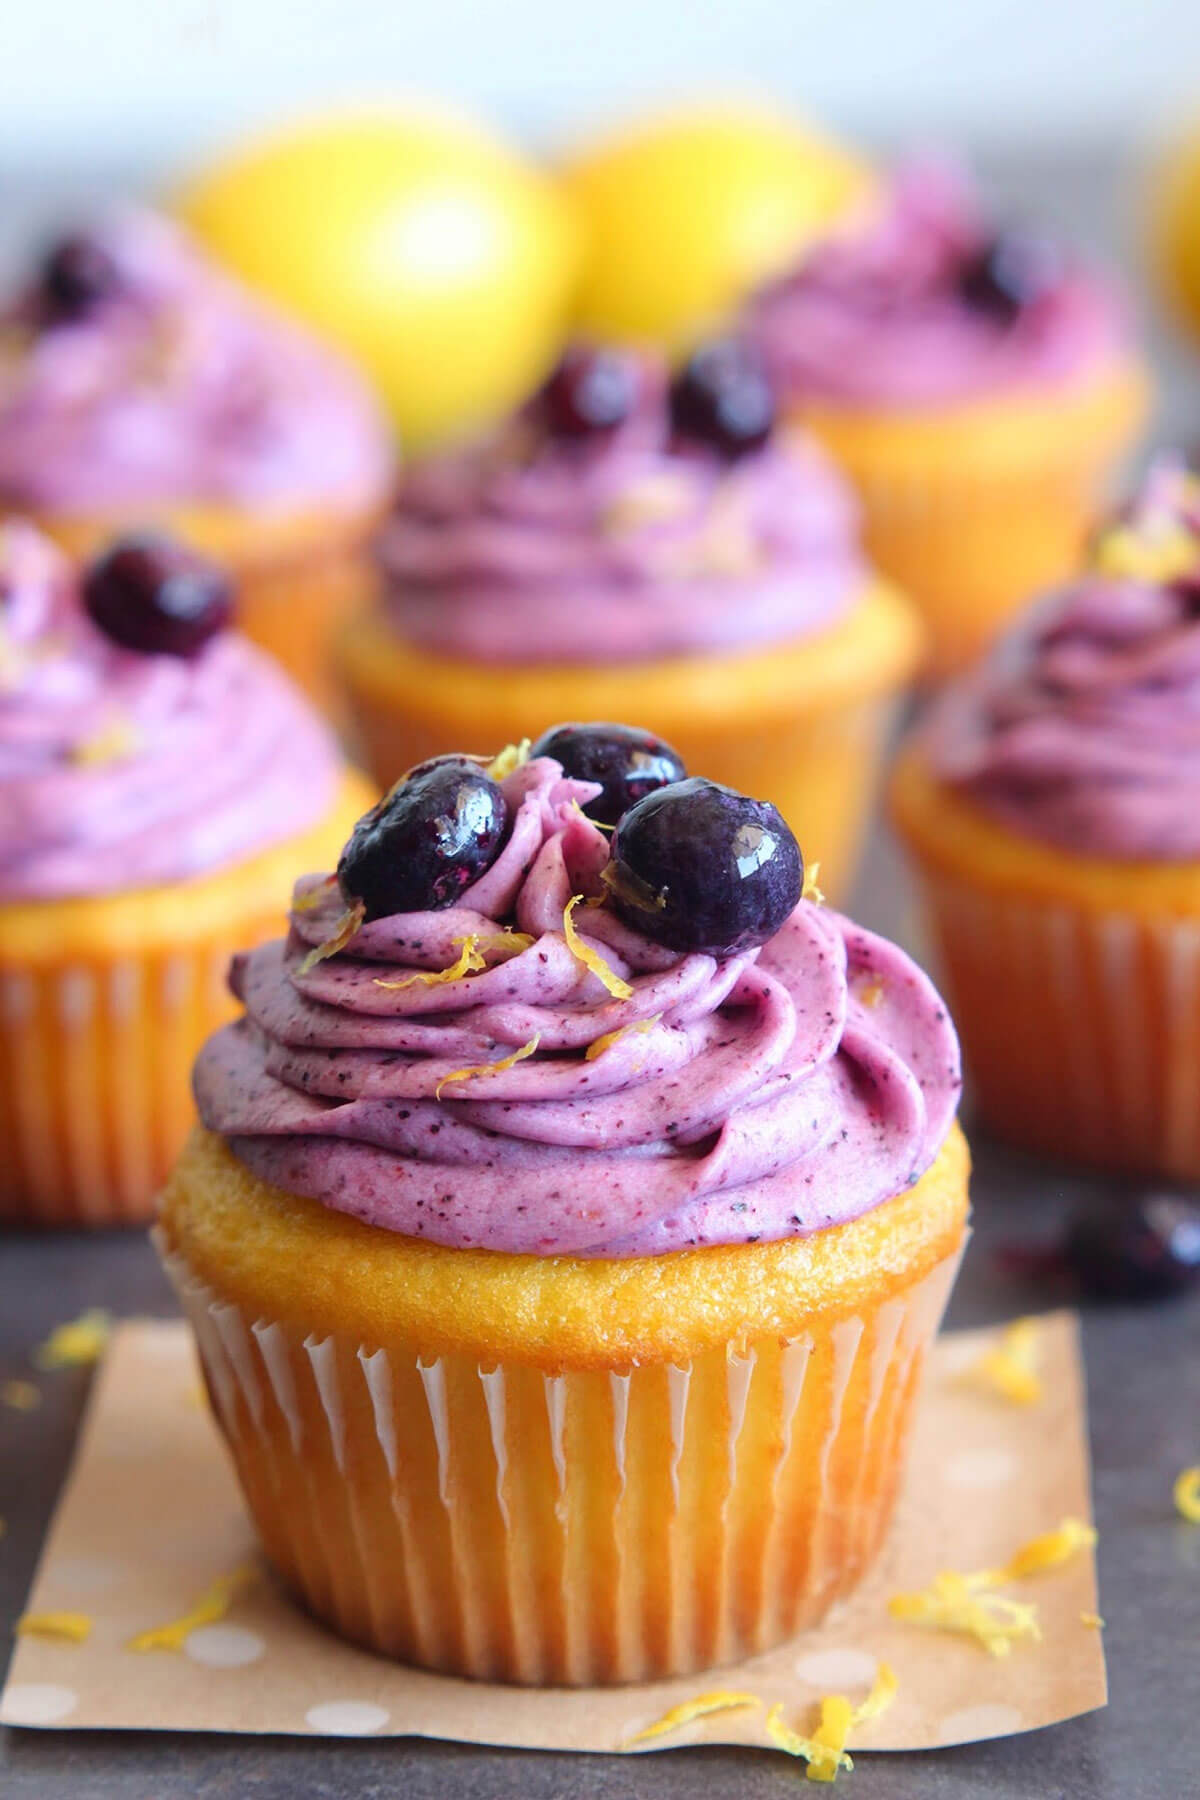 Triple Lemon Cupcakes with Blueberry Frosting